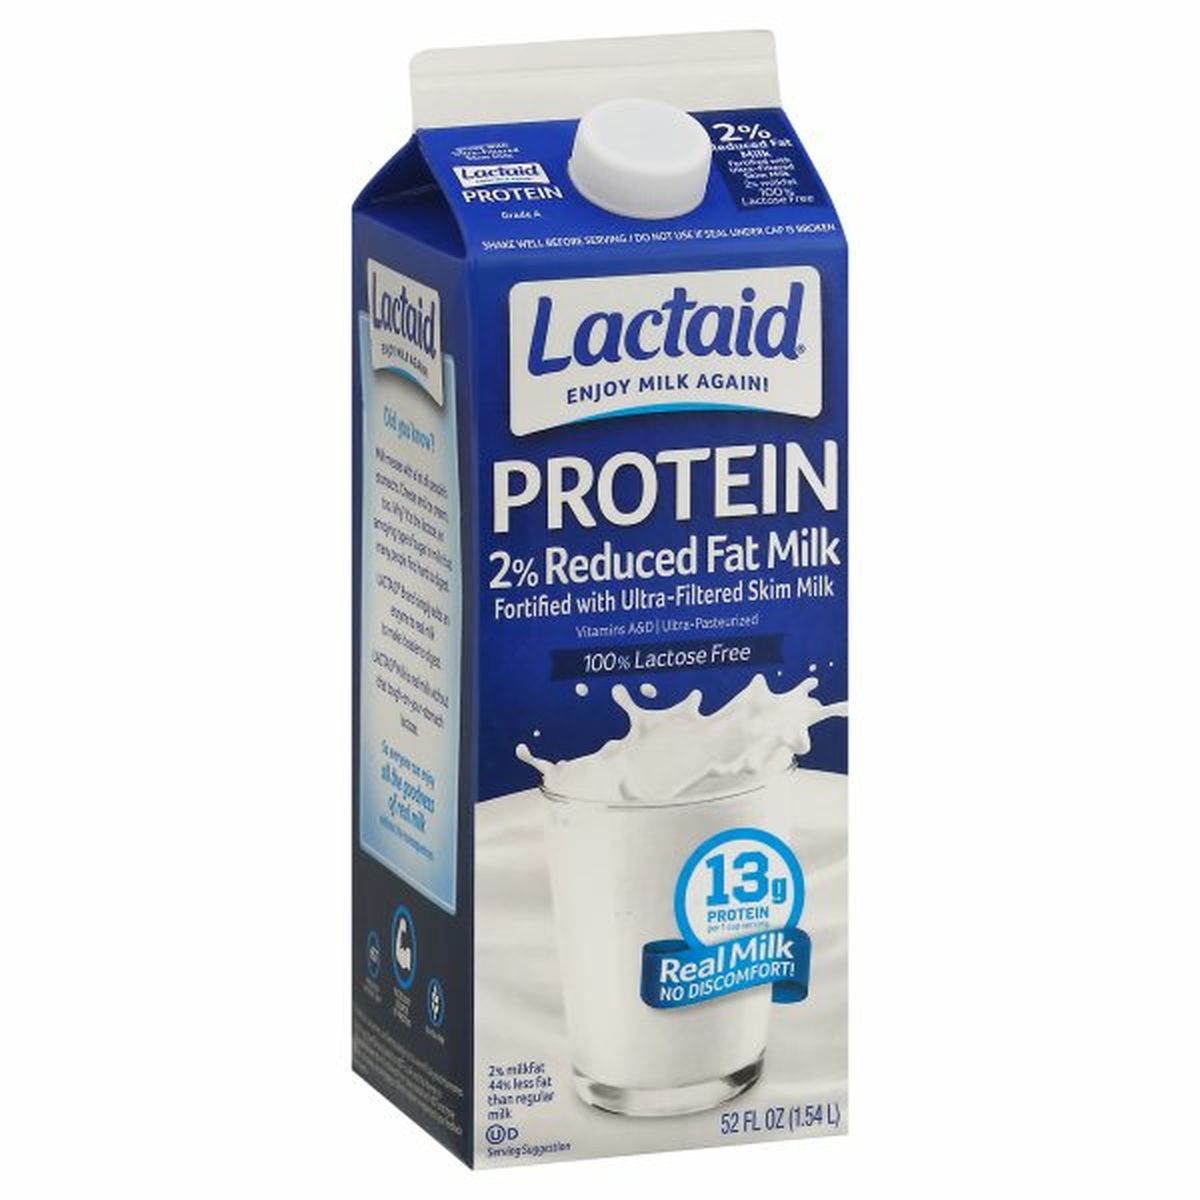 Calories in Lactaid Milk, 2% Reduced Fat, Protein